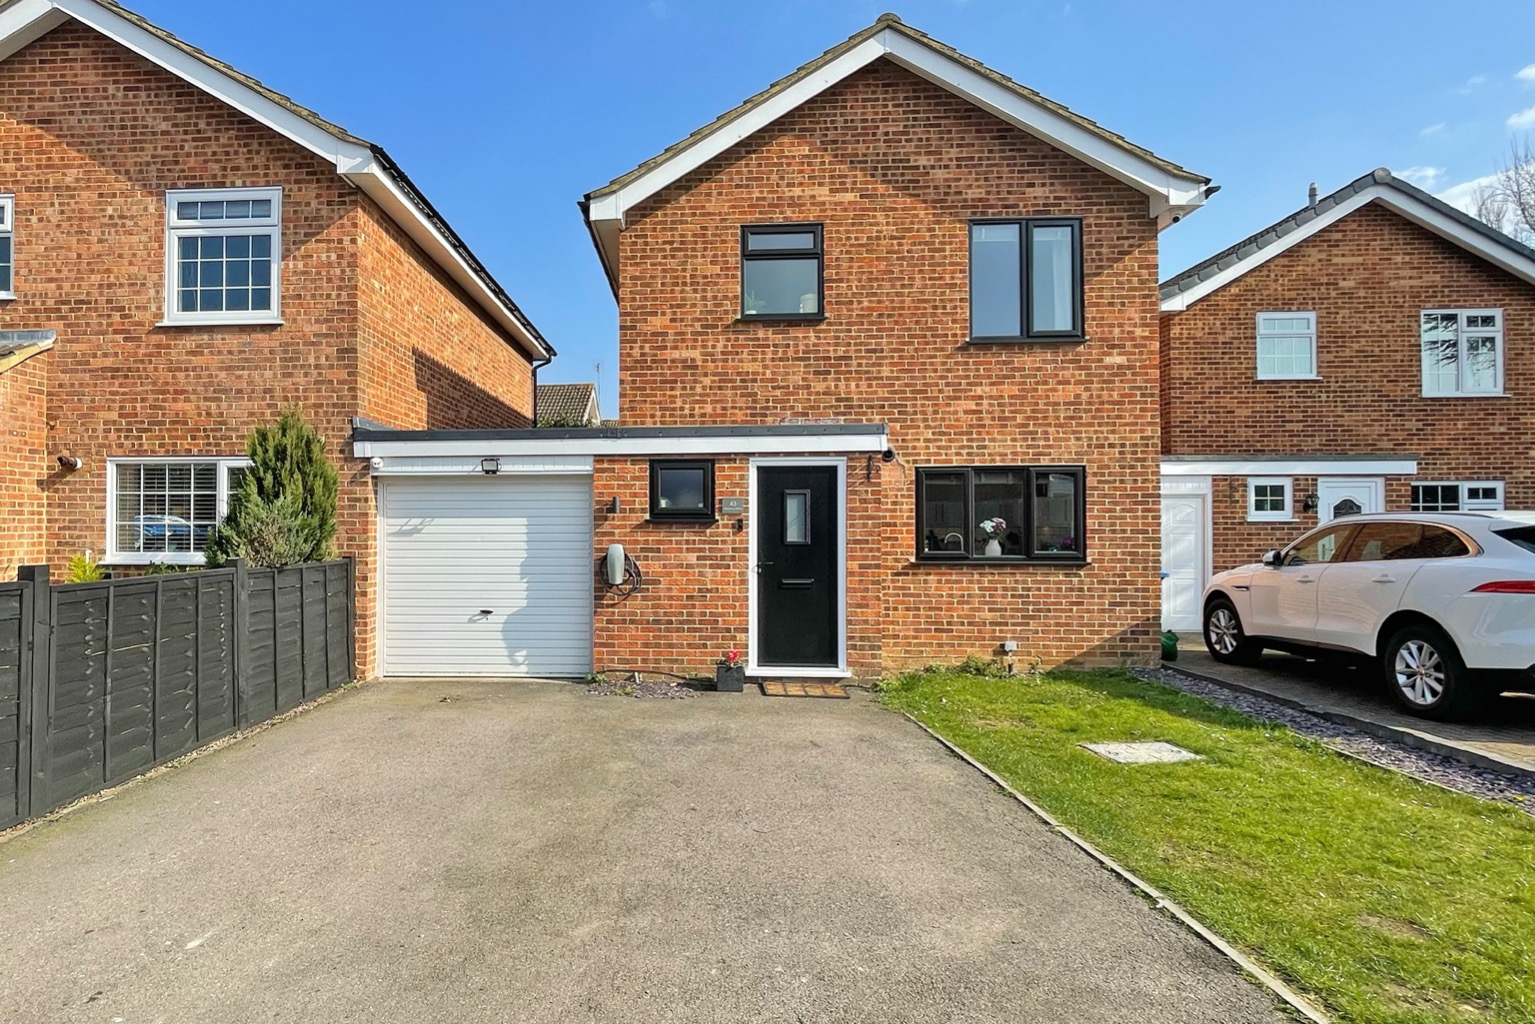 3 bed detached house for sale in Treesmill Drive, Maidenhead, SL6 